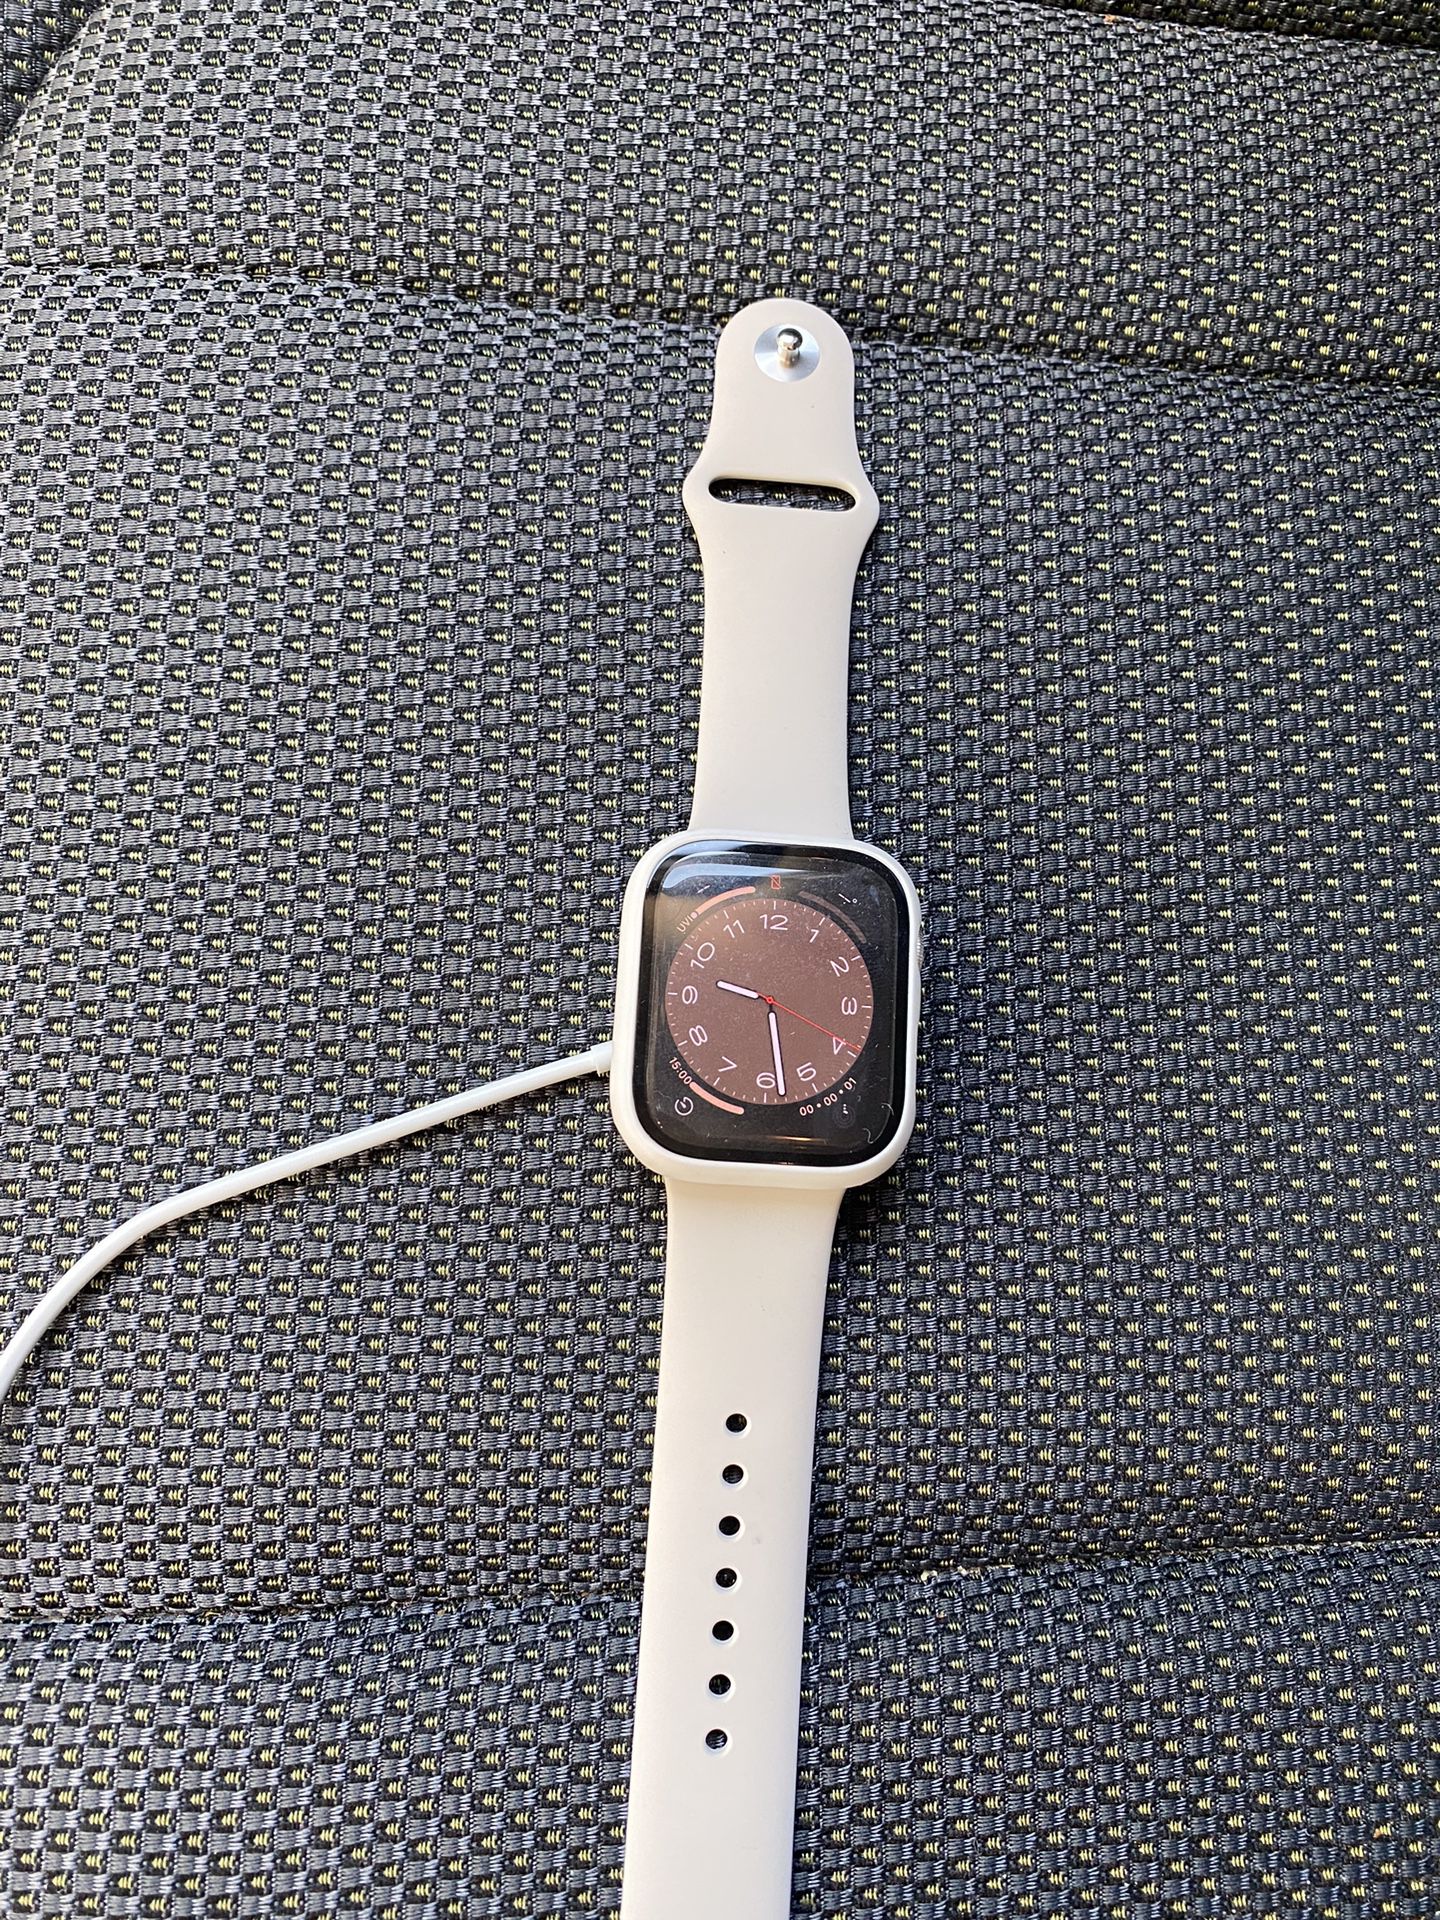 New Apple Watch & Charger